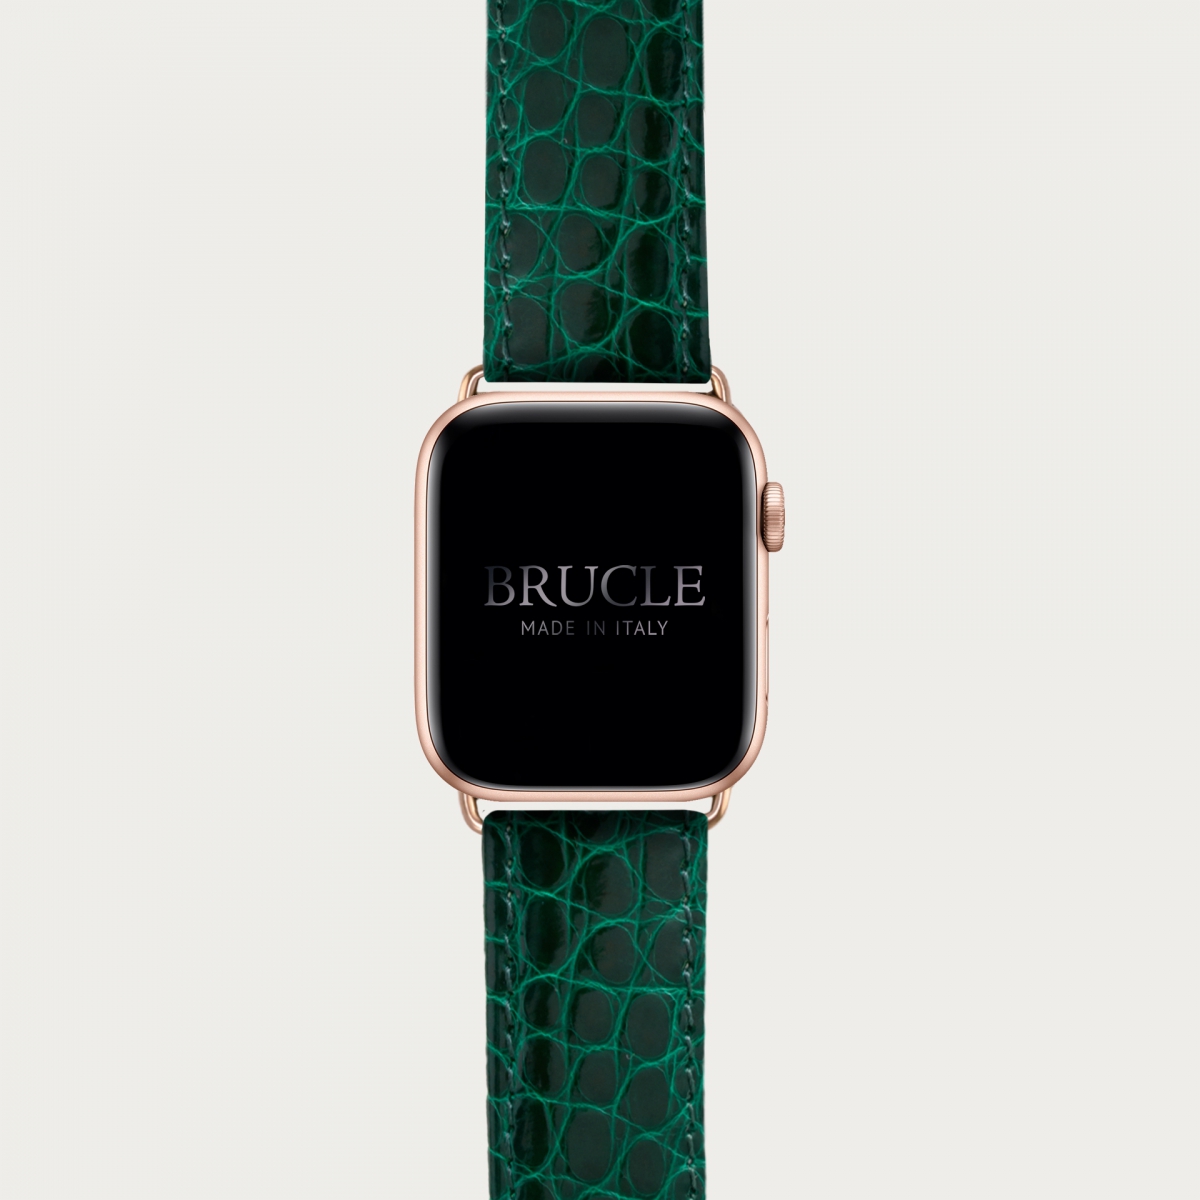 Brucle Alligator Leather Watch band compatible with Apple Watch / Samsung smartwatch, green